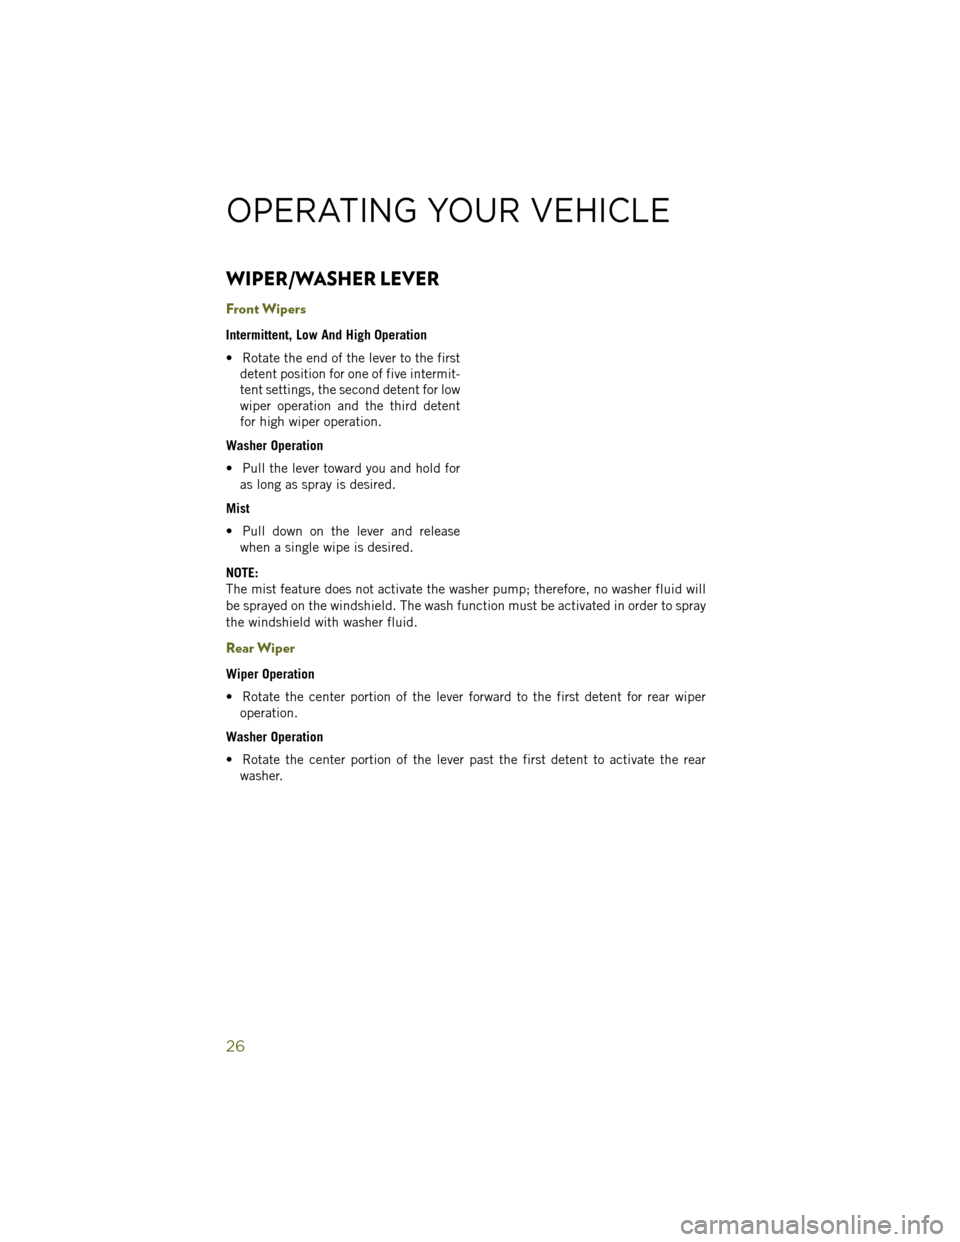 JEEP WRANGLER 2014 JK / 3.G User Guide WIPER/WASHER LEVER
Front Wipers
Intermittent, Low And High Operation
• Rotate the end of the lever to the firstdetent position for one of five intermit-
tent settings, the second detent for low
wipe